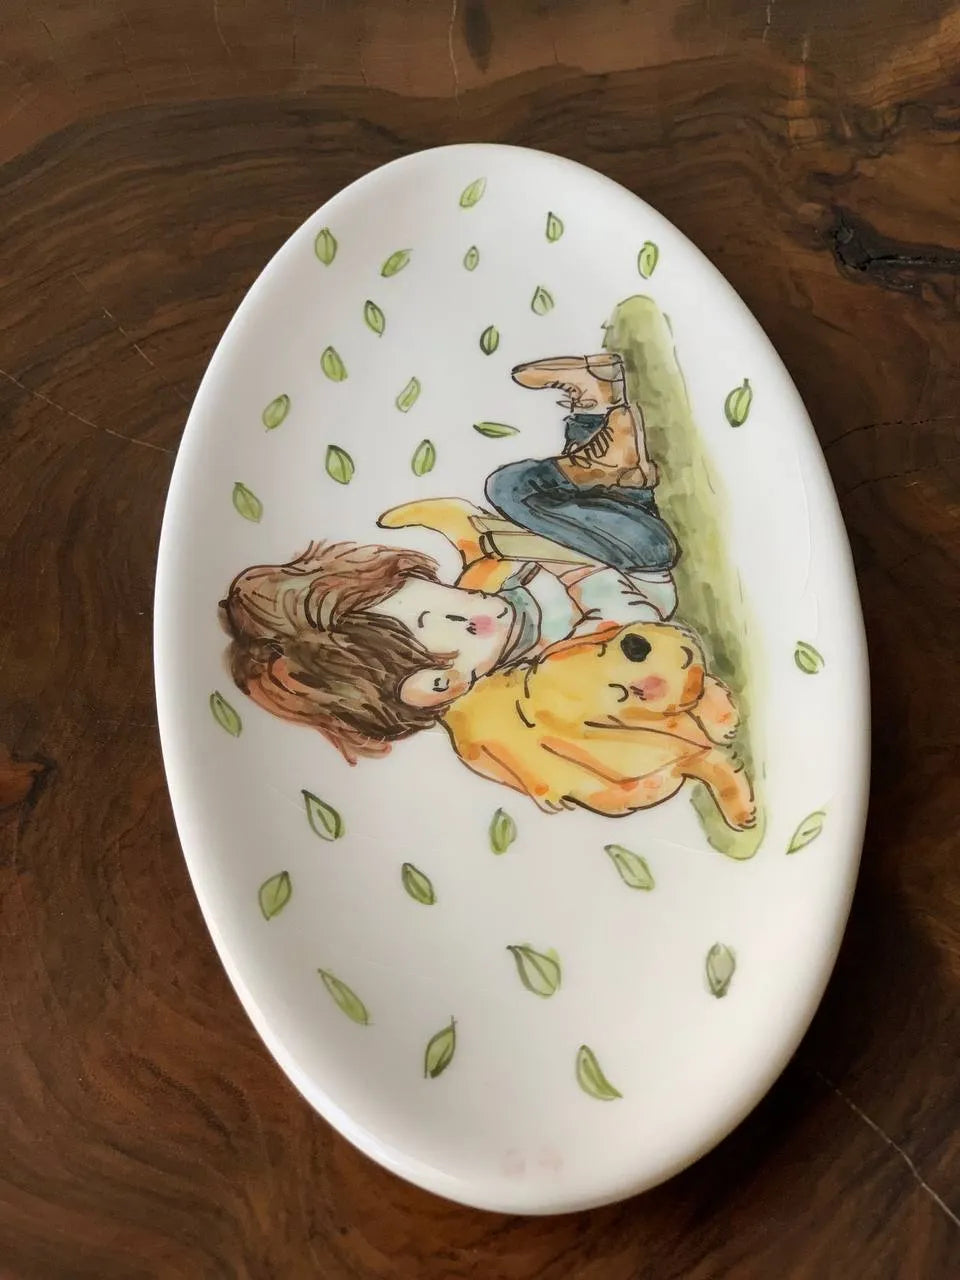  32x15 cm hand painted ceramic plate, boy & dog reading book